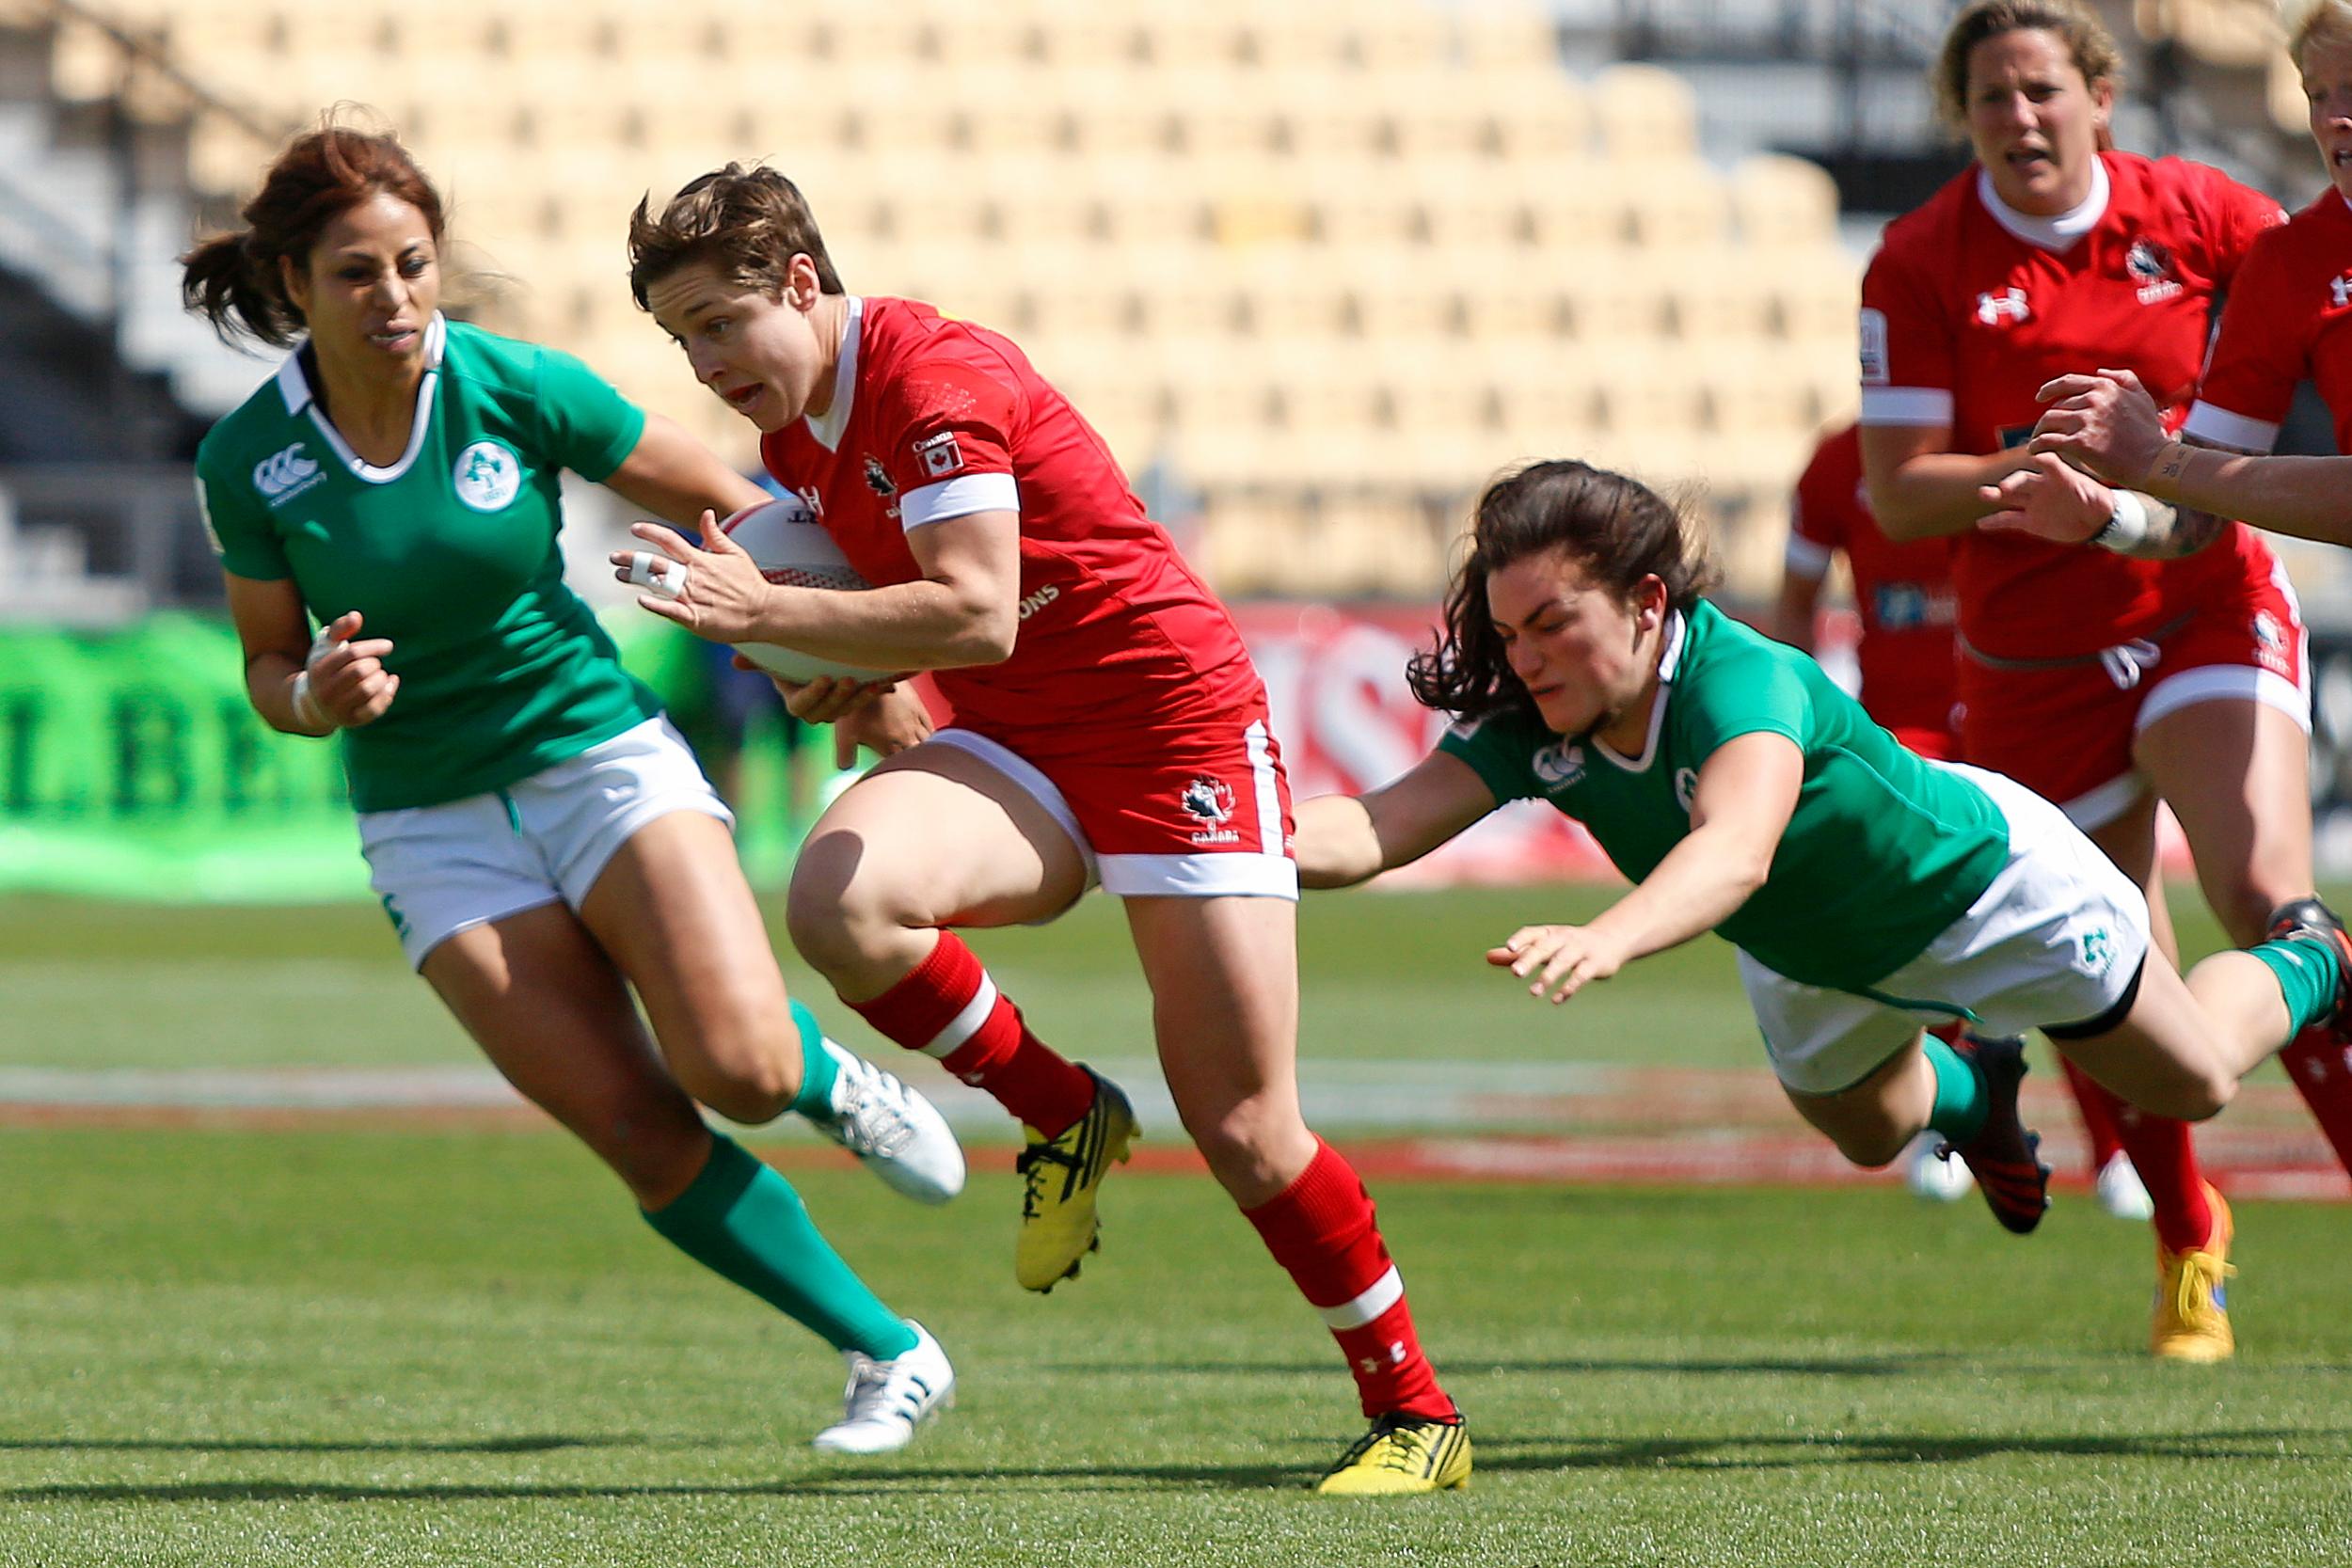 Ghislaine Landry breaks away from a tackle at Atlanta 7s (Photo: Mike Lee @ KLC Fotos).